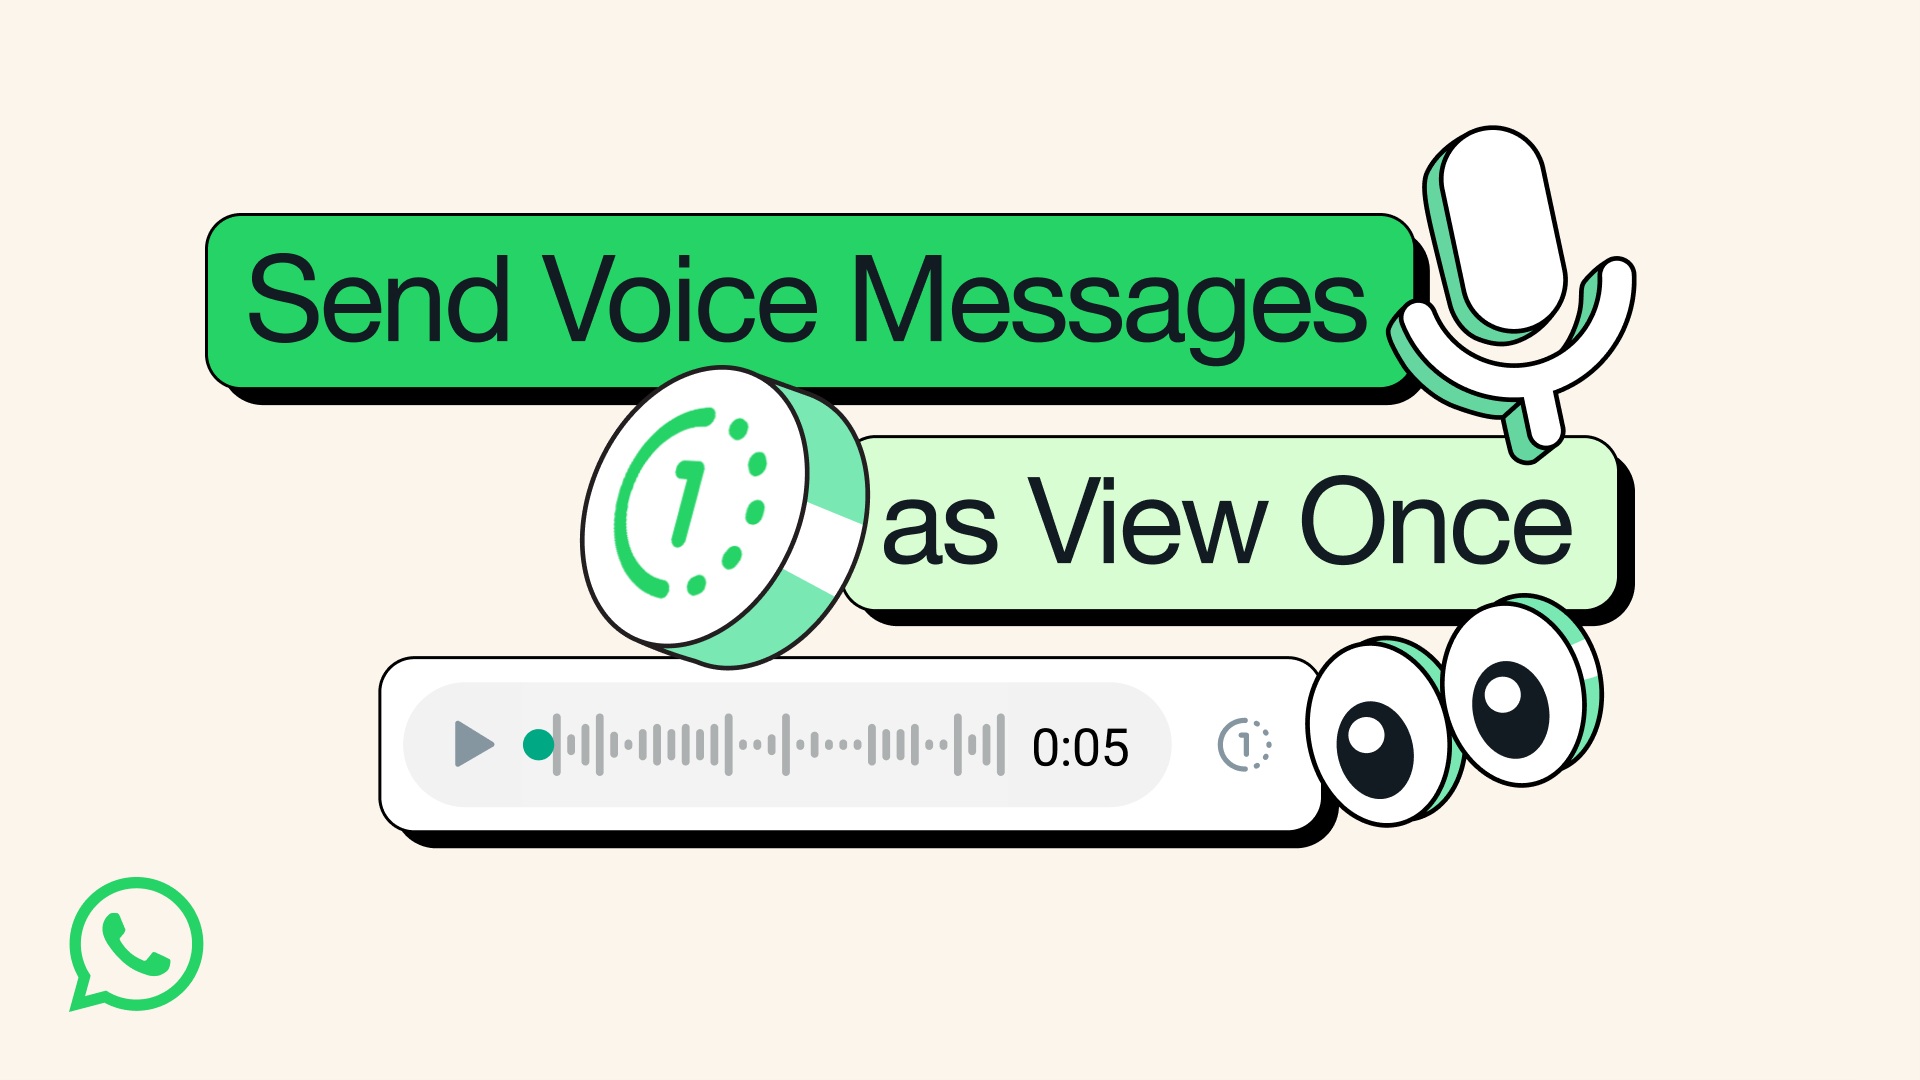 WhatsApp launches view once feature for voice messages